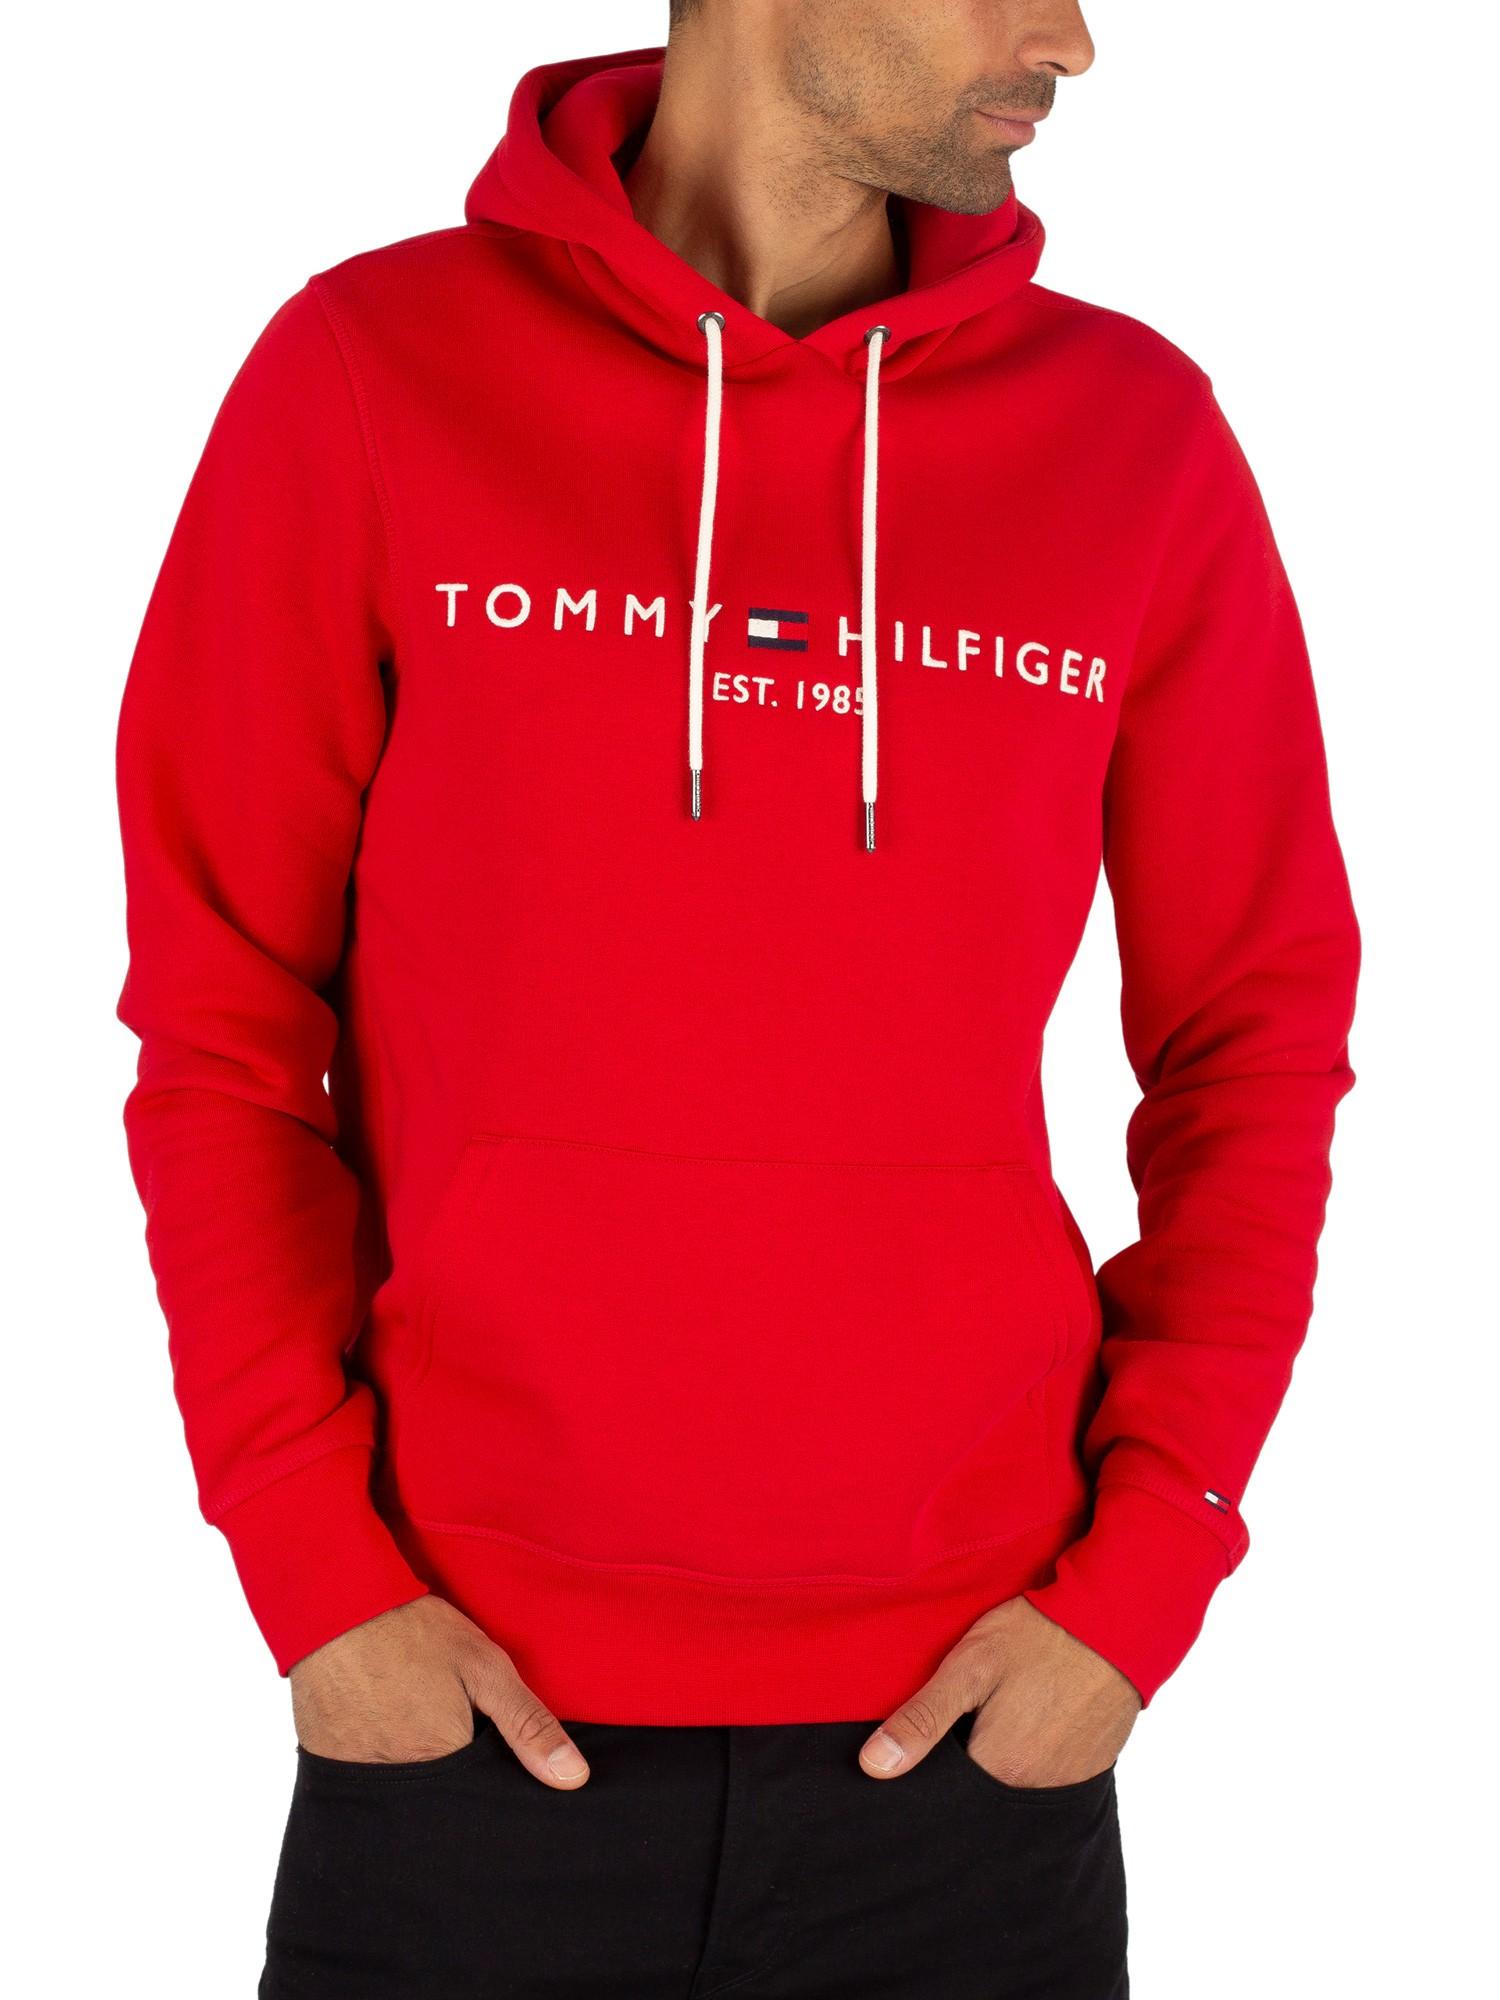 Tommy Hilfiger Cotton Logo Pullover Hoodie in Red for Men - Lyst